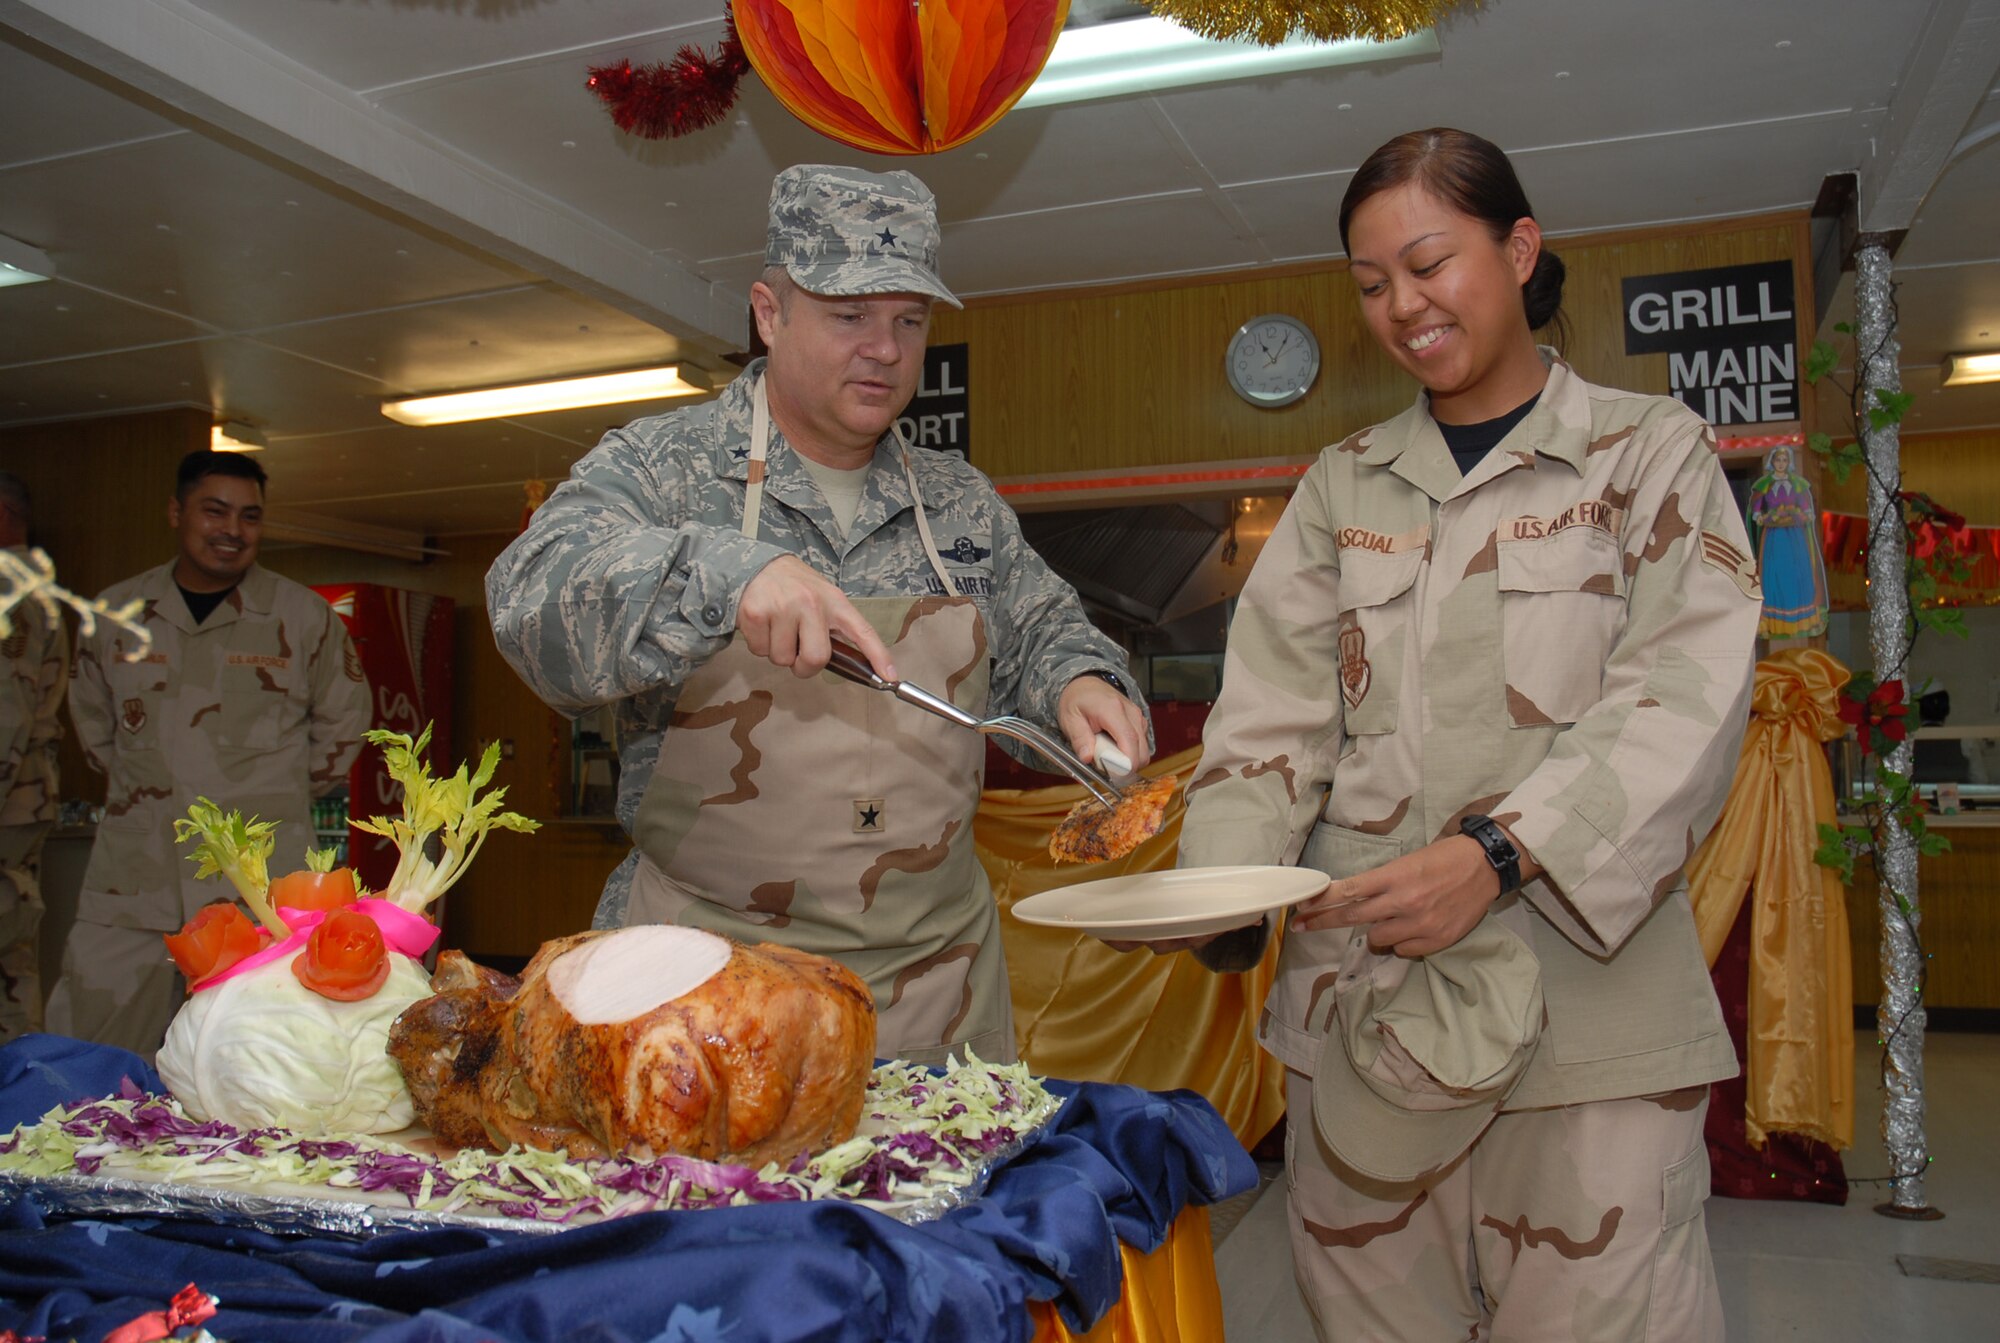 SOUTHWEST ASIA - Brig. Gen. Charlie Lyon, 379th Air Expeditionary Wing commander, serves the first cut from the Thanksgiving Day turkey to Senior Airman Nikki Pascaul at the Independence Dining Facility Nov. 22 at a Southwest Asia air base. Airman Pascaul is from  deployed here from Nellis Air Force Base, Nev., and her hometown is Honolulu, Hawaii. (U. S. Air Force photo/Staff Sgt. Douglas Olsen)